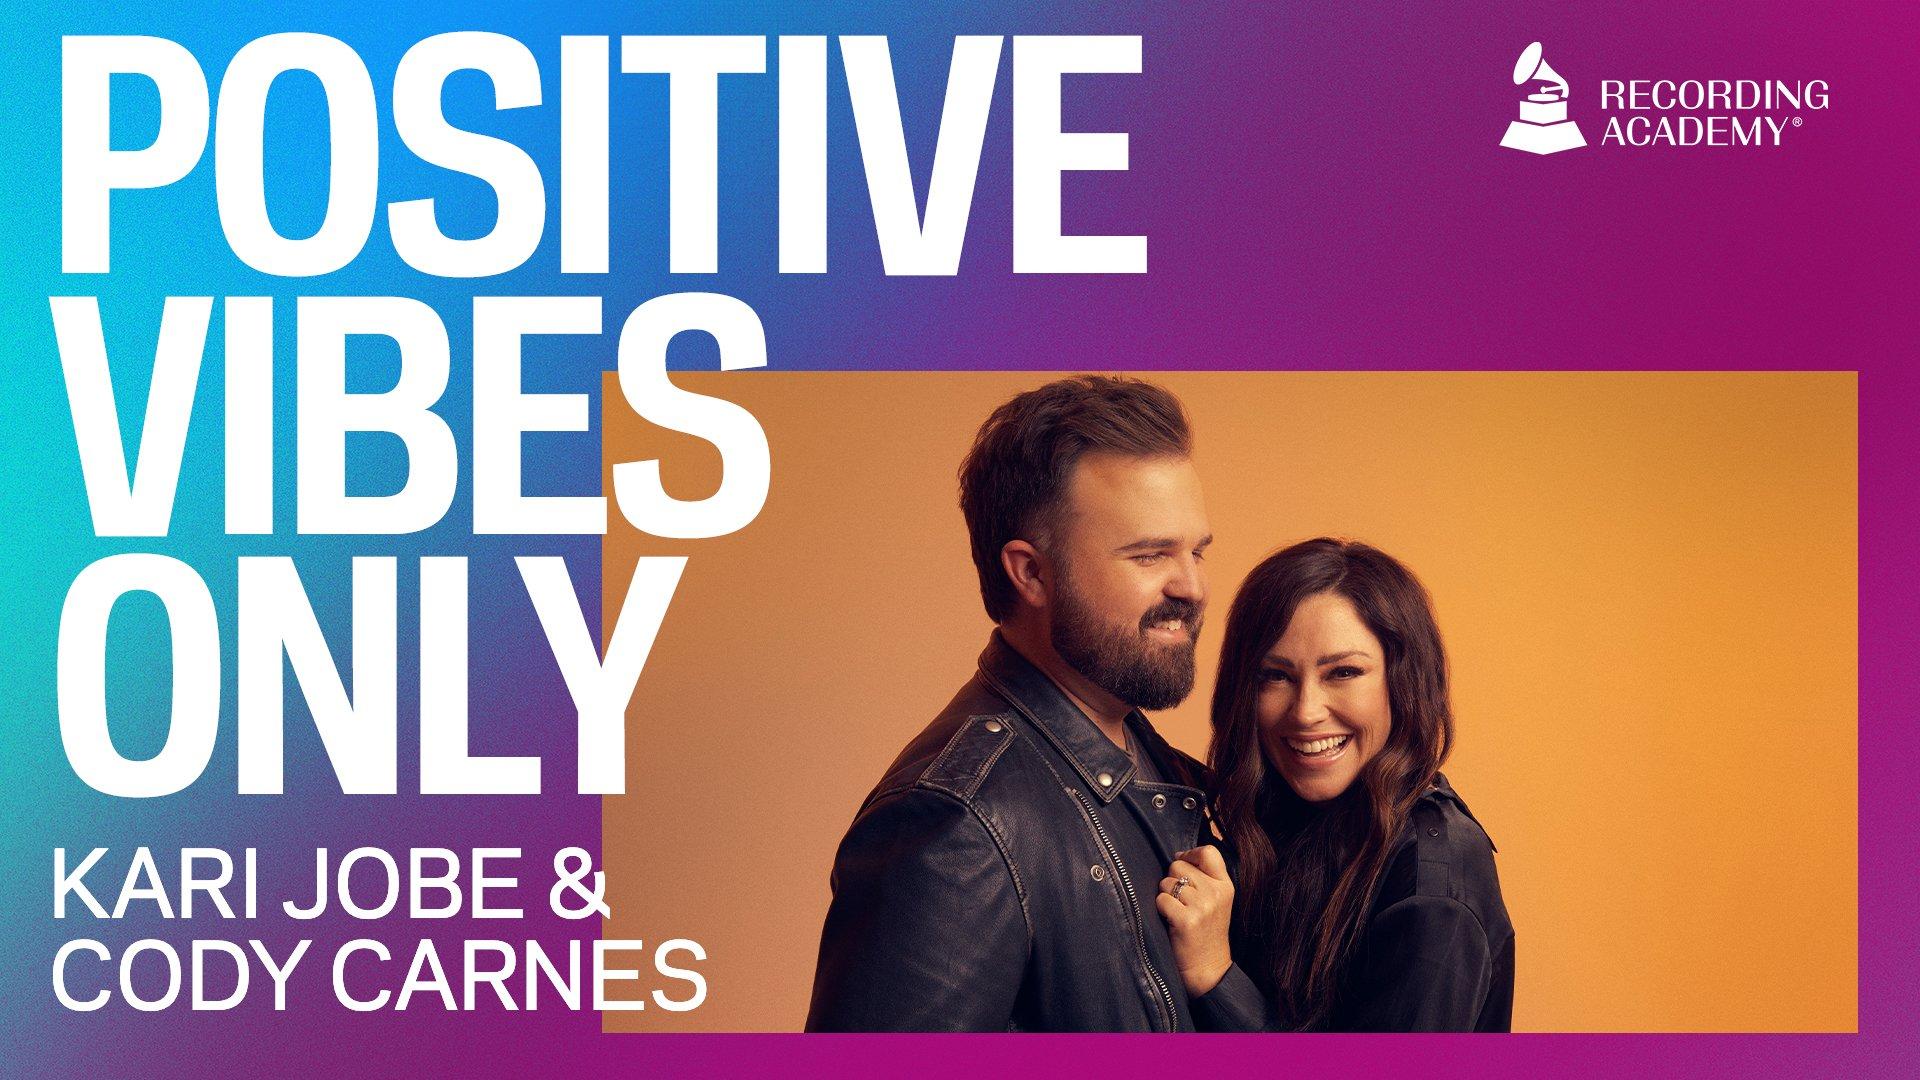 Kari Jobe And Cody Carnes Perform "The Blessing"